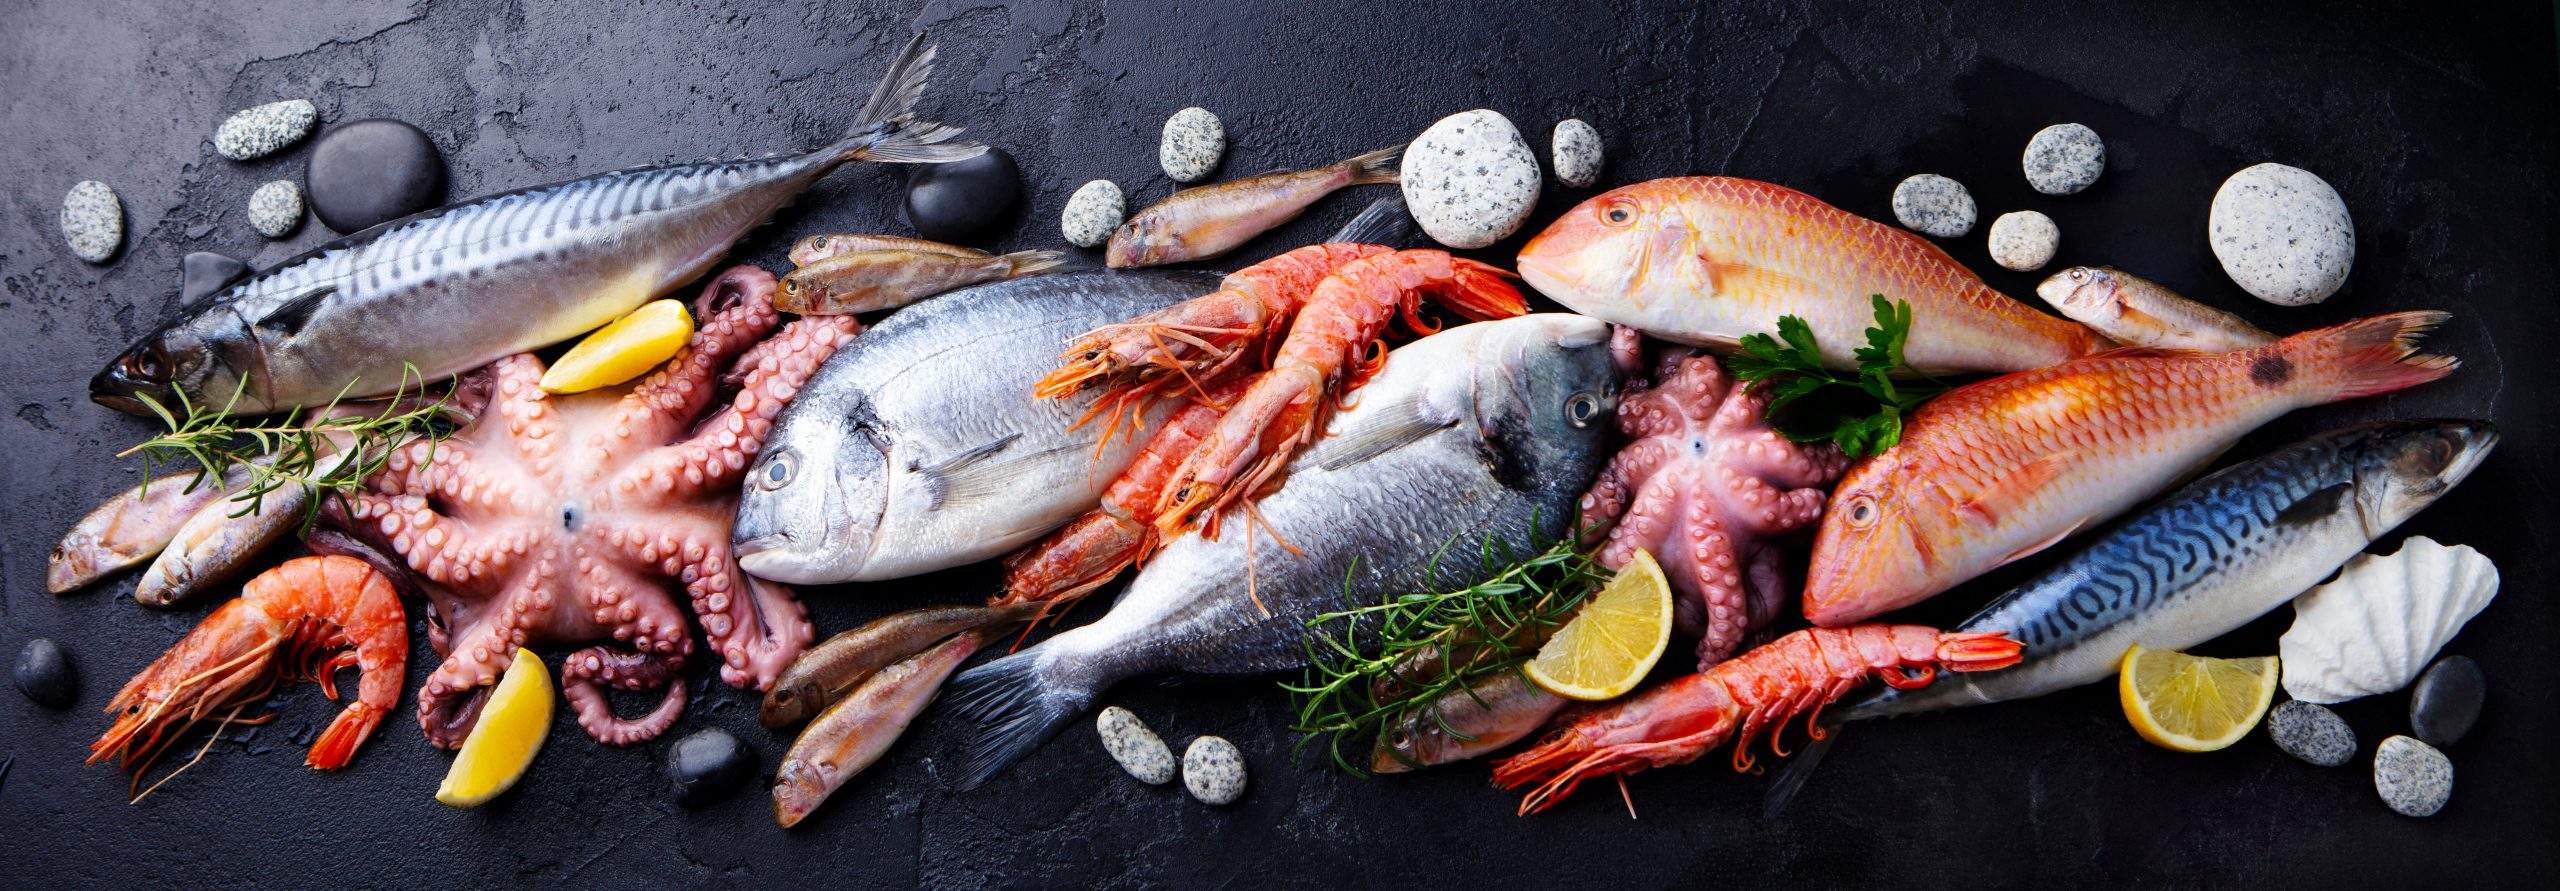 Fresh fish and seafood assortment on black slate background